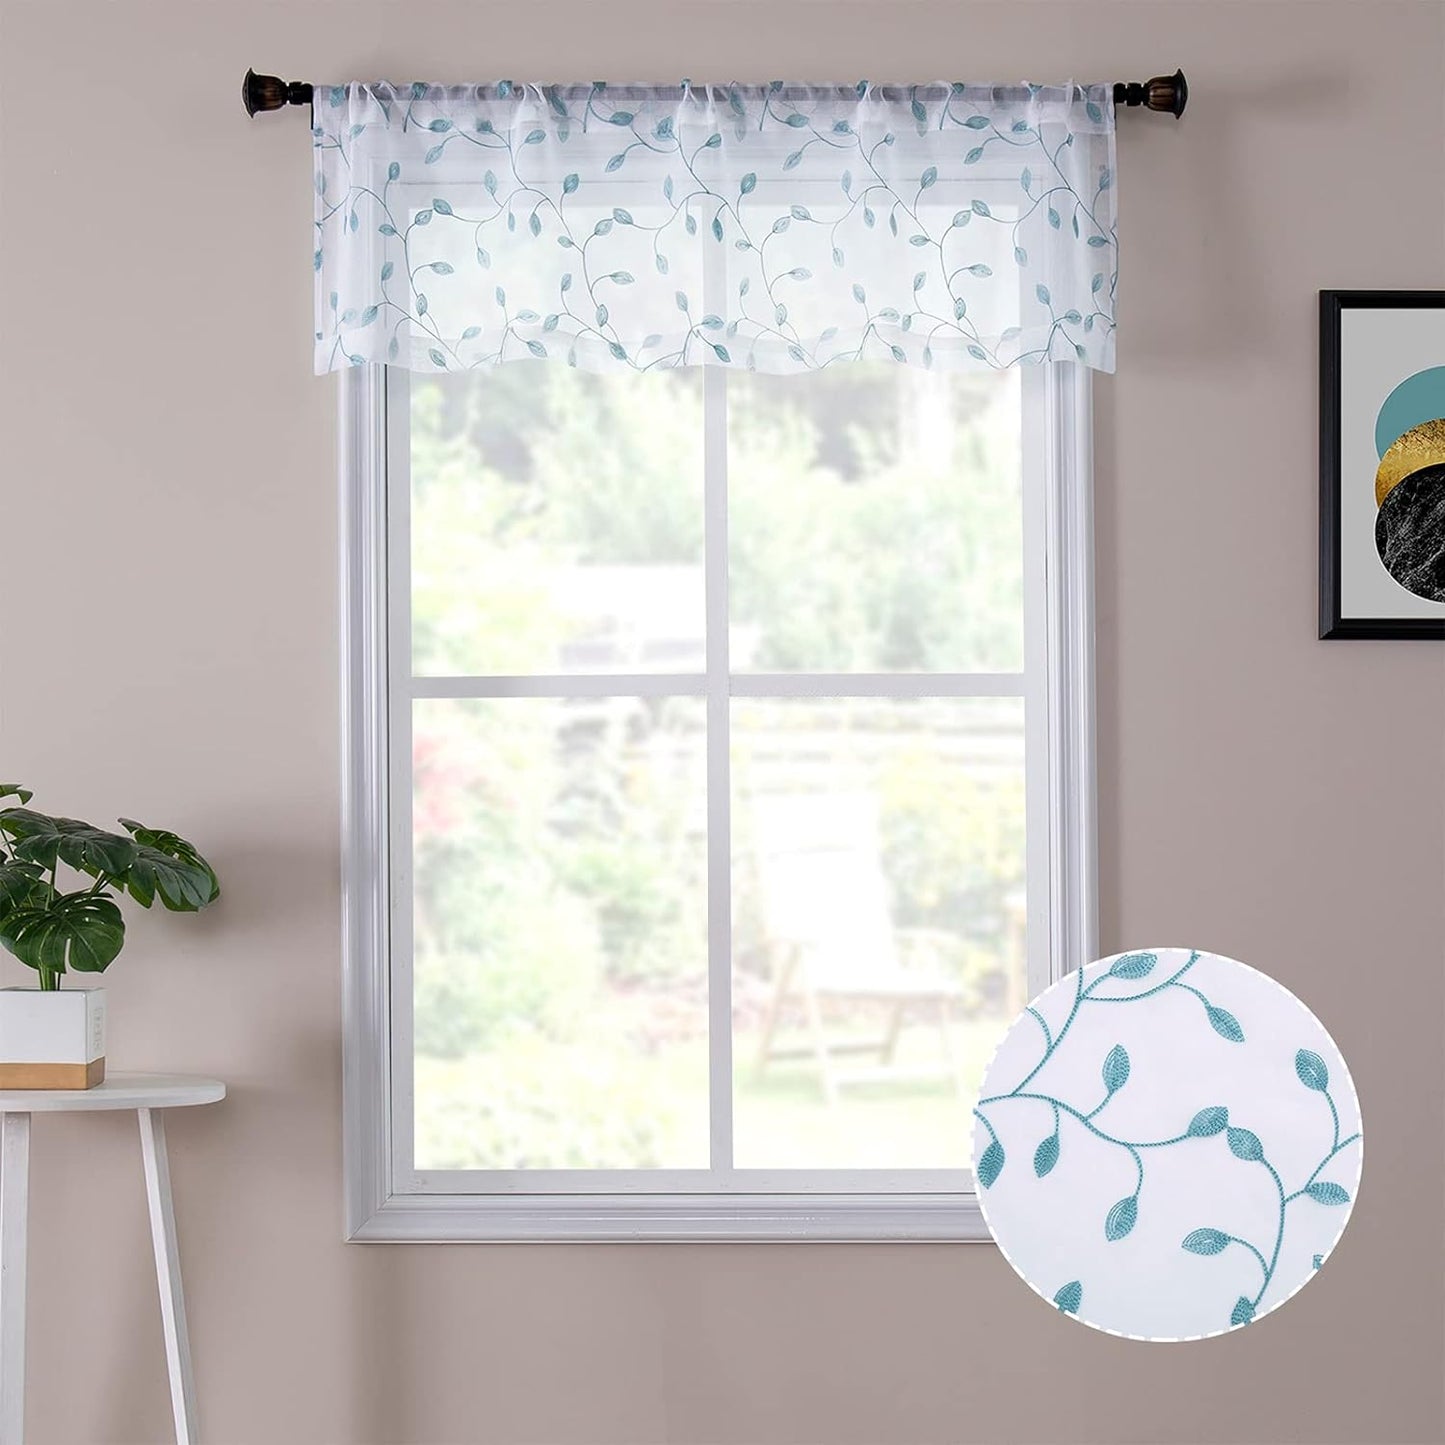 Tollpiz Leaves Sheer Valance Curtains White Leaf Embroidery Bedroom Curtain Rod Pocket Voile Curtains for Living Room, 54 X 16 Inches Long, Set of 1 Panel  Tollpiz Tex Teal Blue 54"W X 16"L 